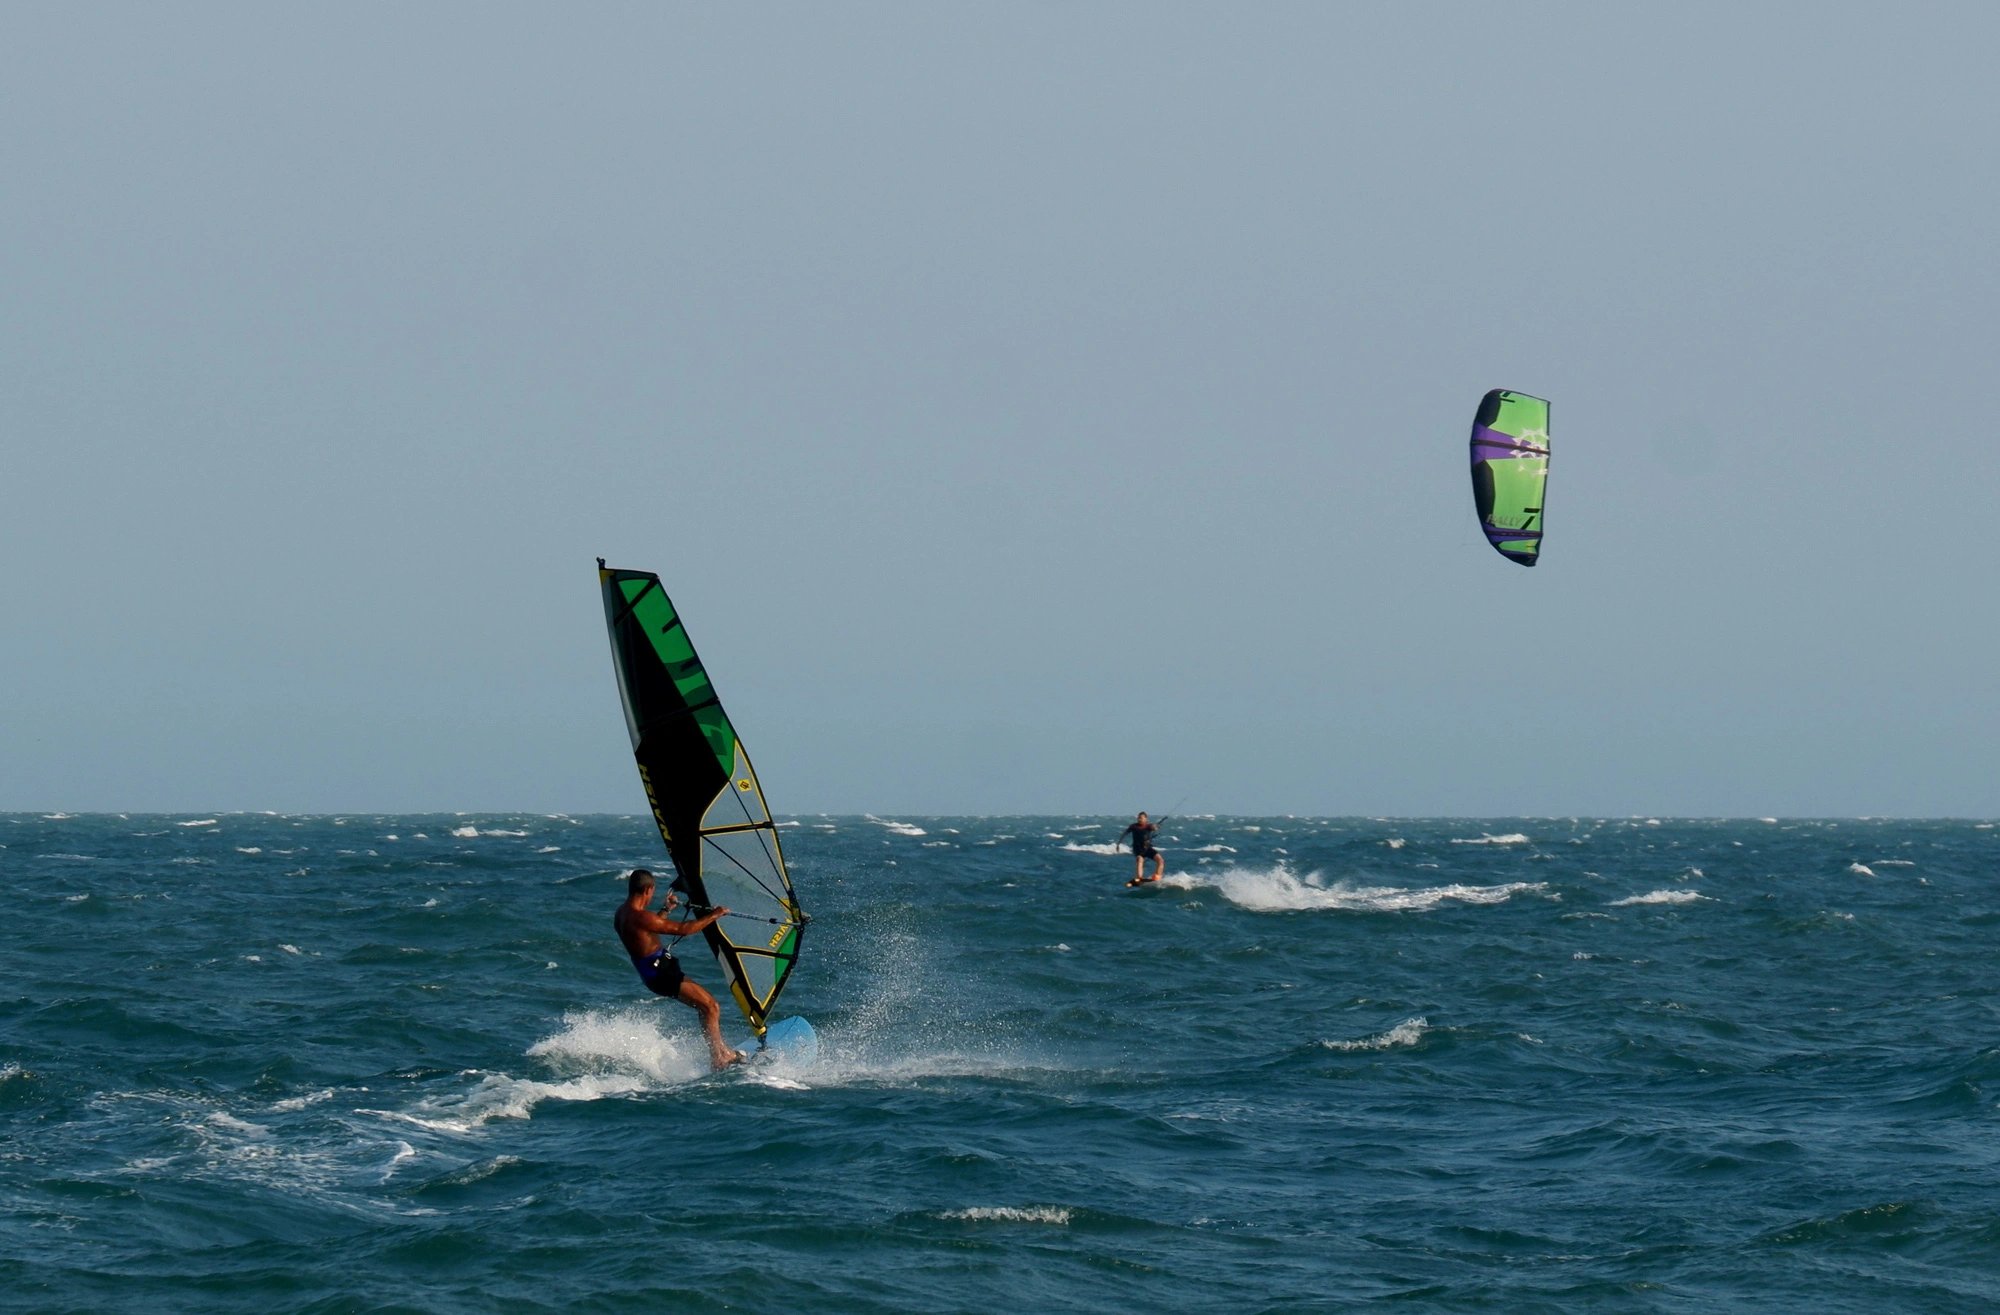 A file photo shows people playing windsurfing and kitesurfing in Mui Ne, Phan Thiet, Binh Thuan Province, Vietnam in March 2020. Photo: Son Lam / Tuoi Tre